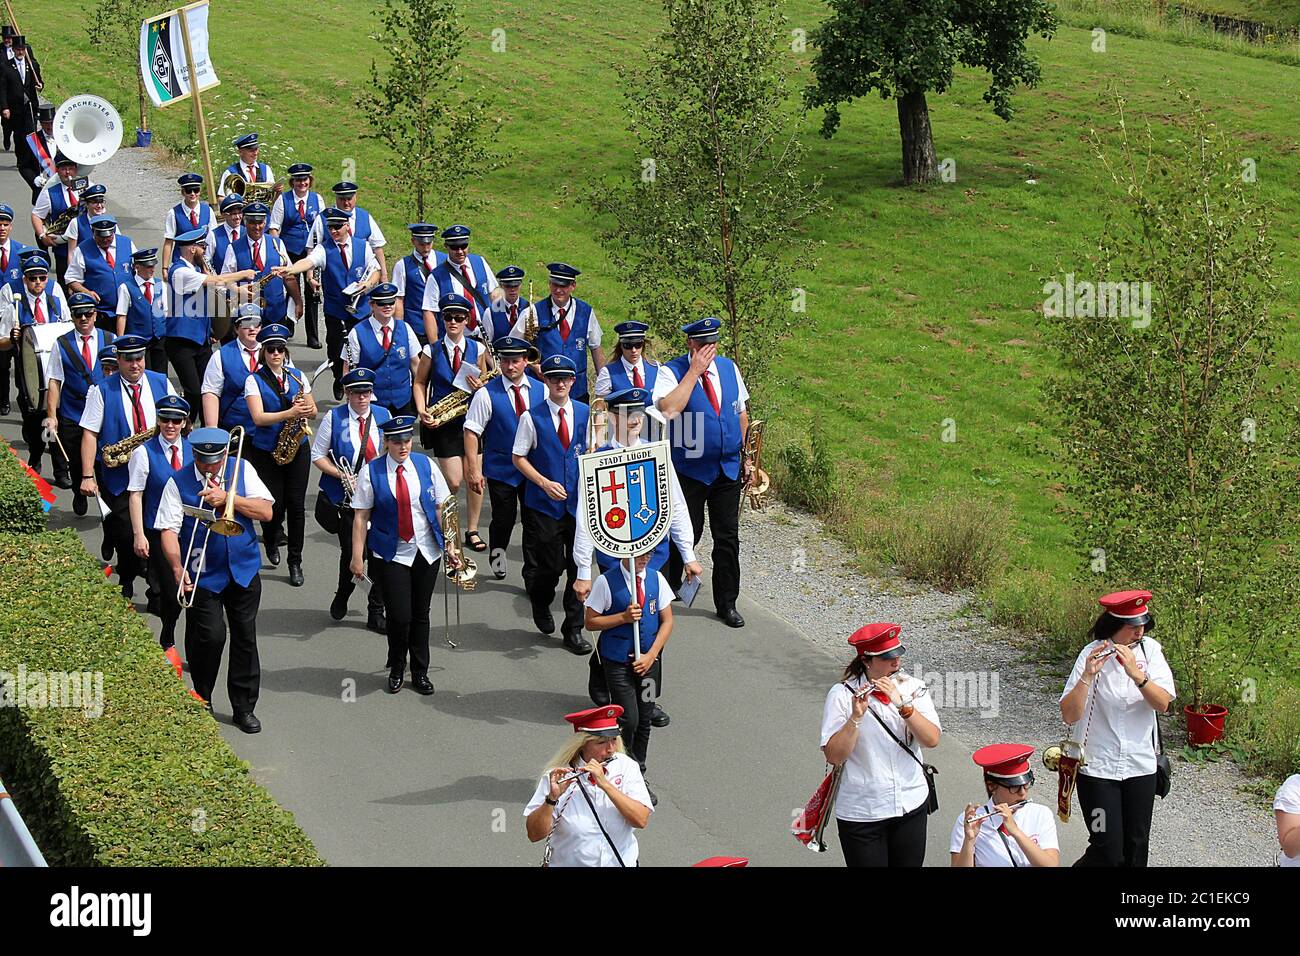 Festive procession of a marching band through residential area at a traditional German Schützenfest (marksmen's festival) in Lügde. Stock Photo